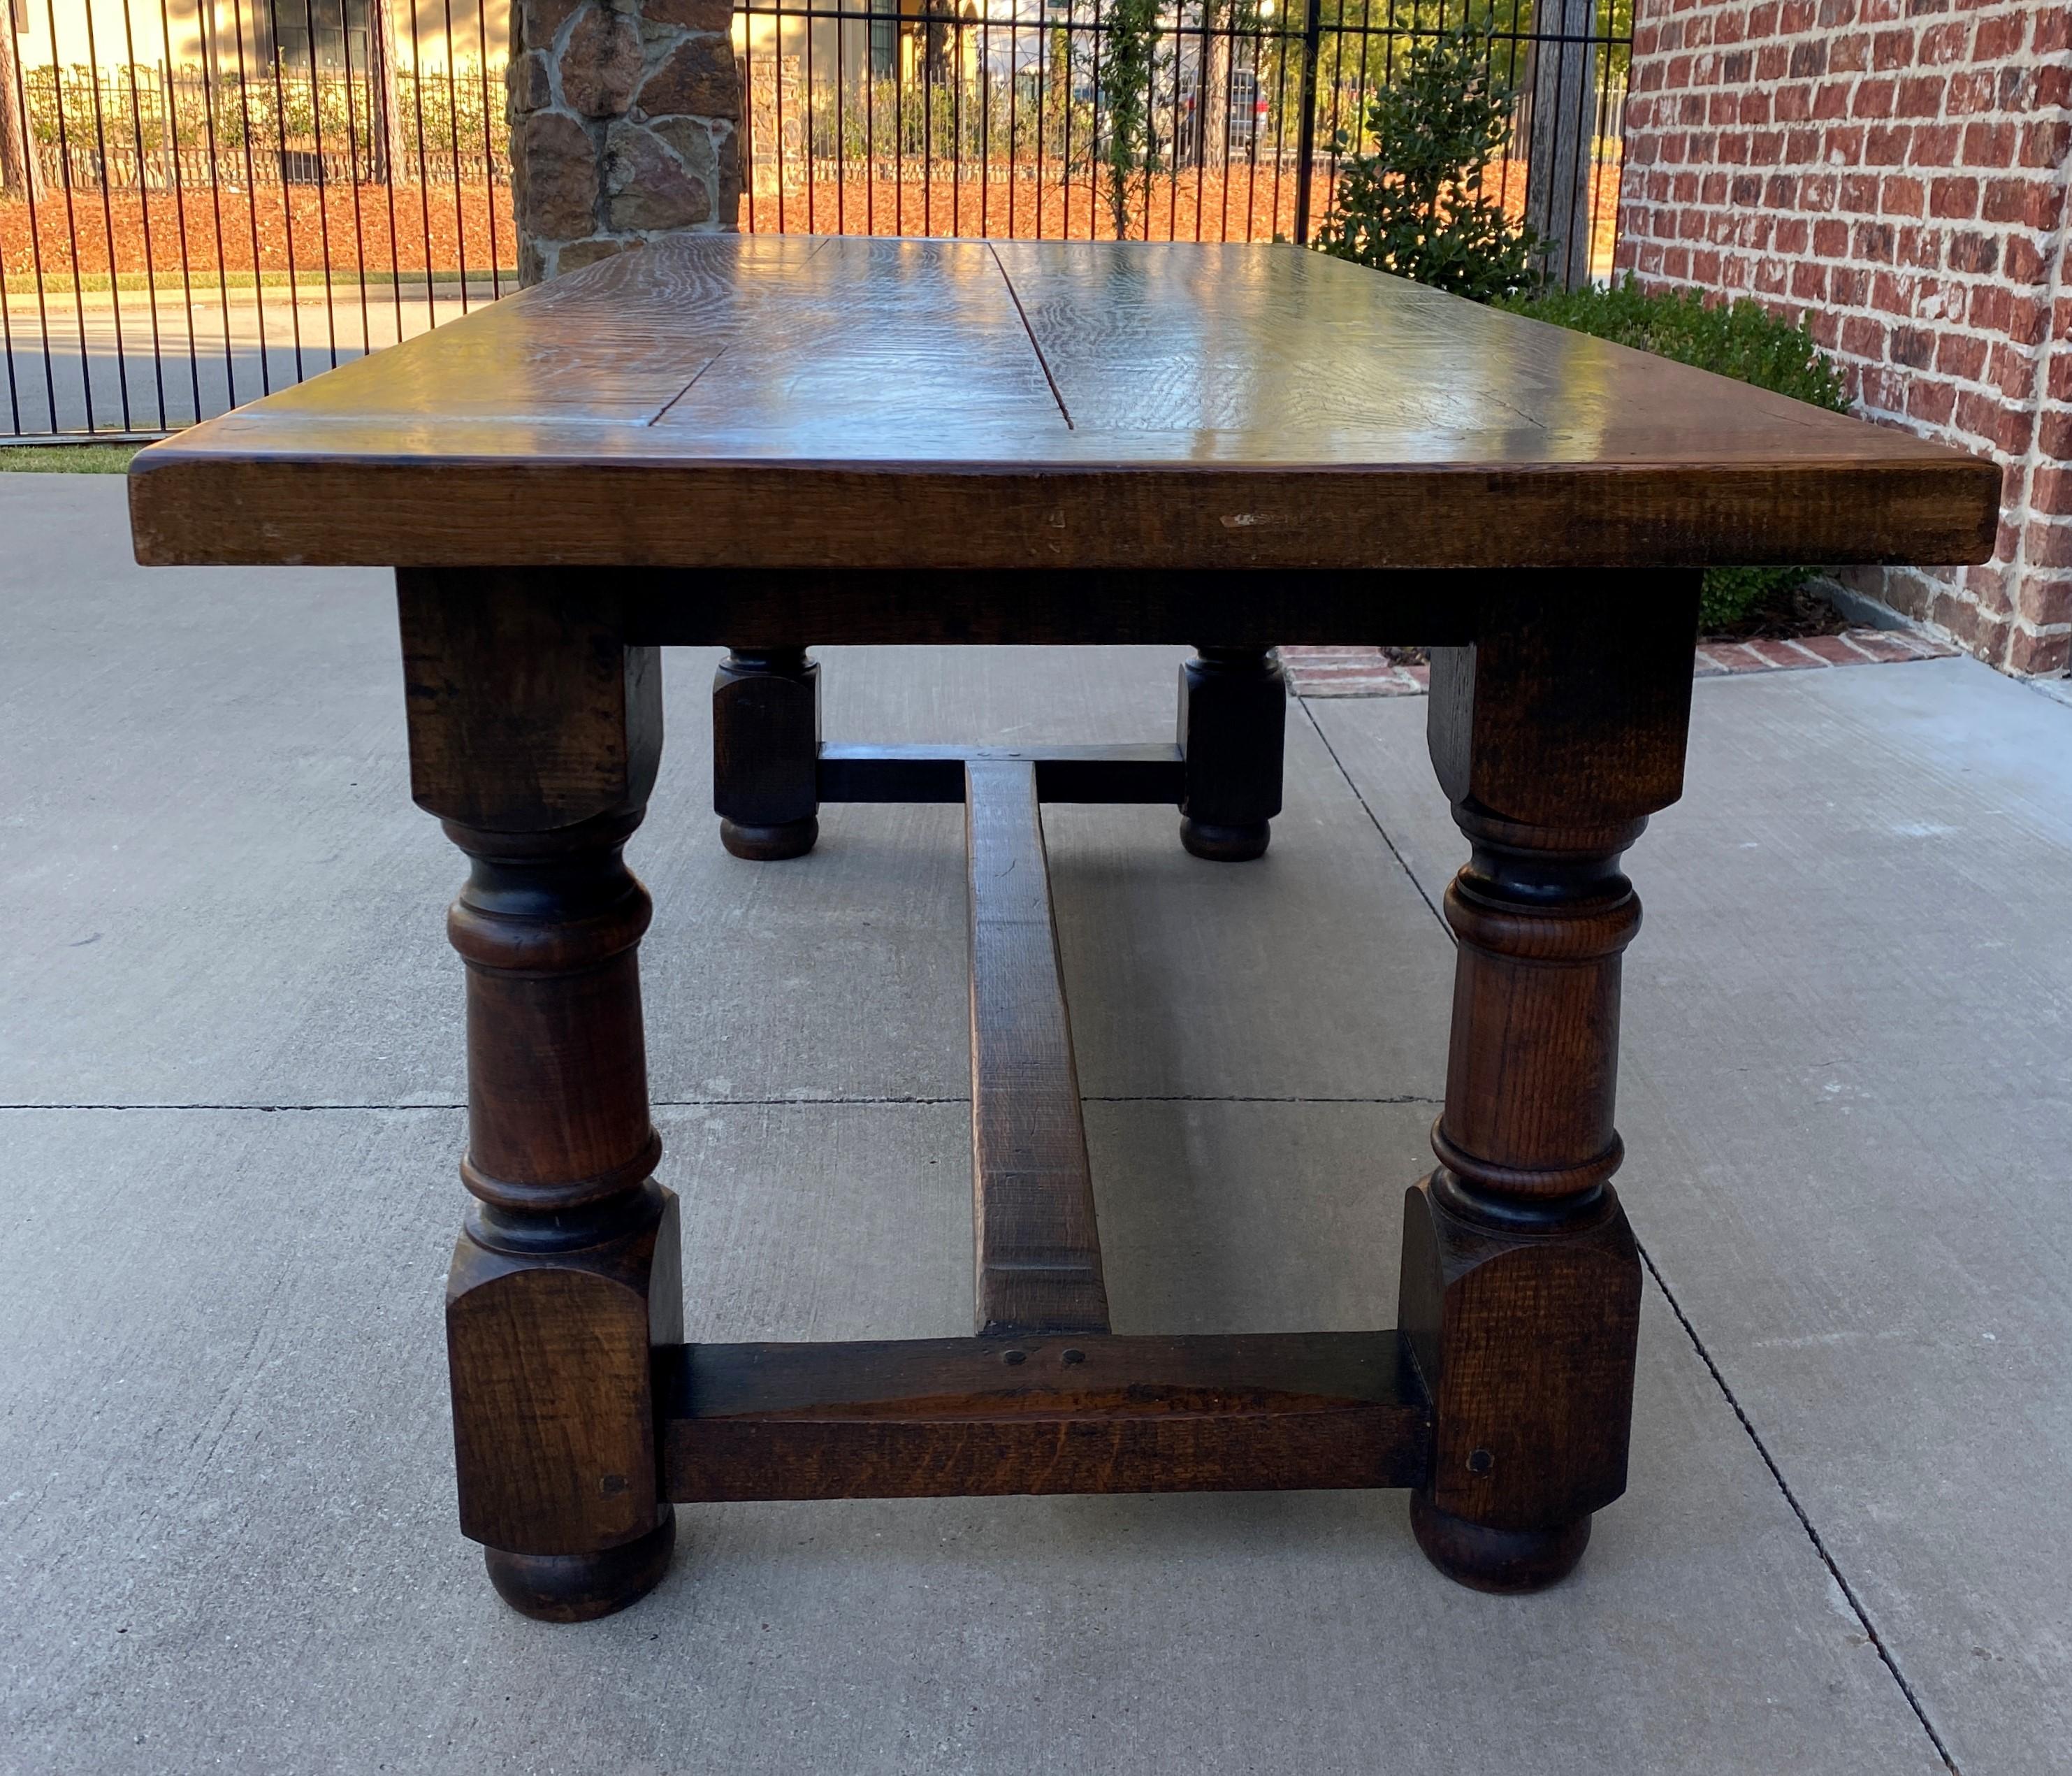 French Provincial Antique French Farm Table Dining Library Table Desk Farmhouse Oak 19th C